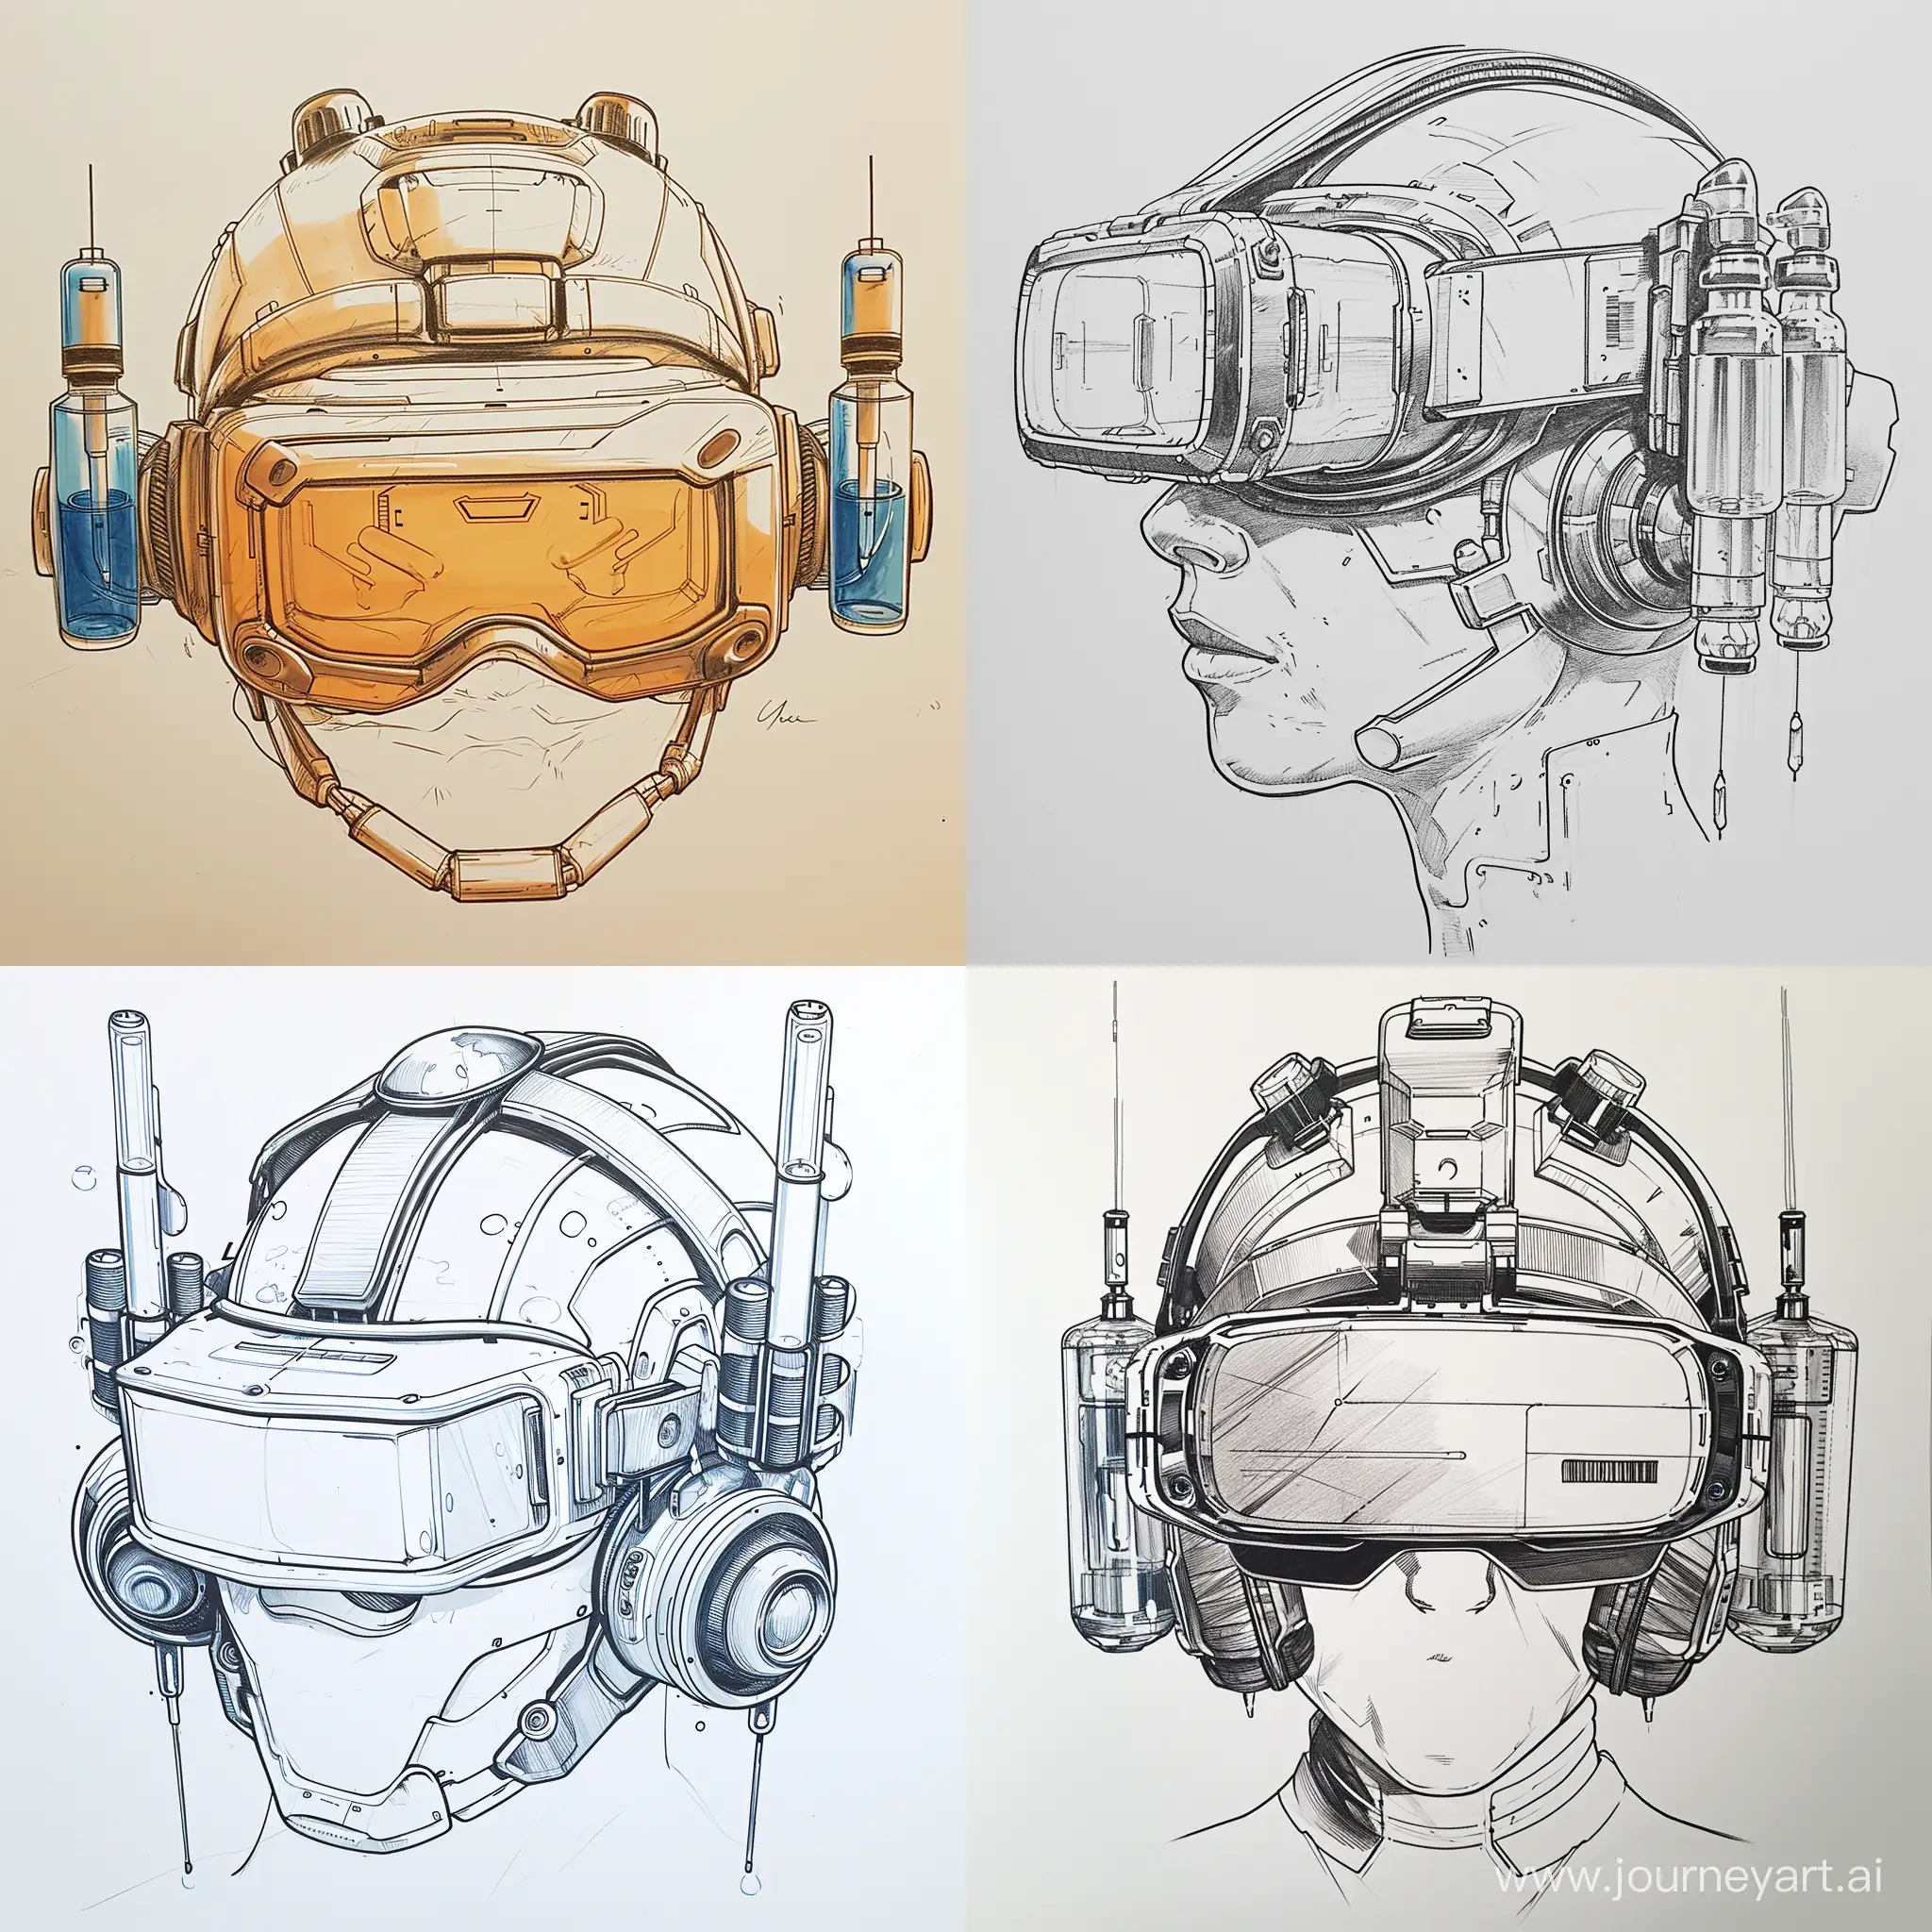 Virtual-Reality-Helmet-with-Ampoules-Futuristic-Tech-Illustration